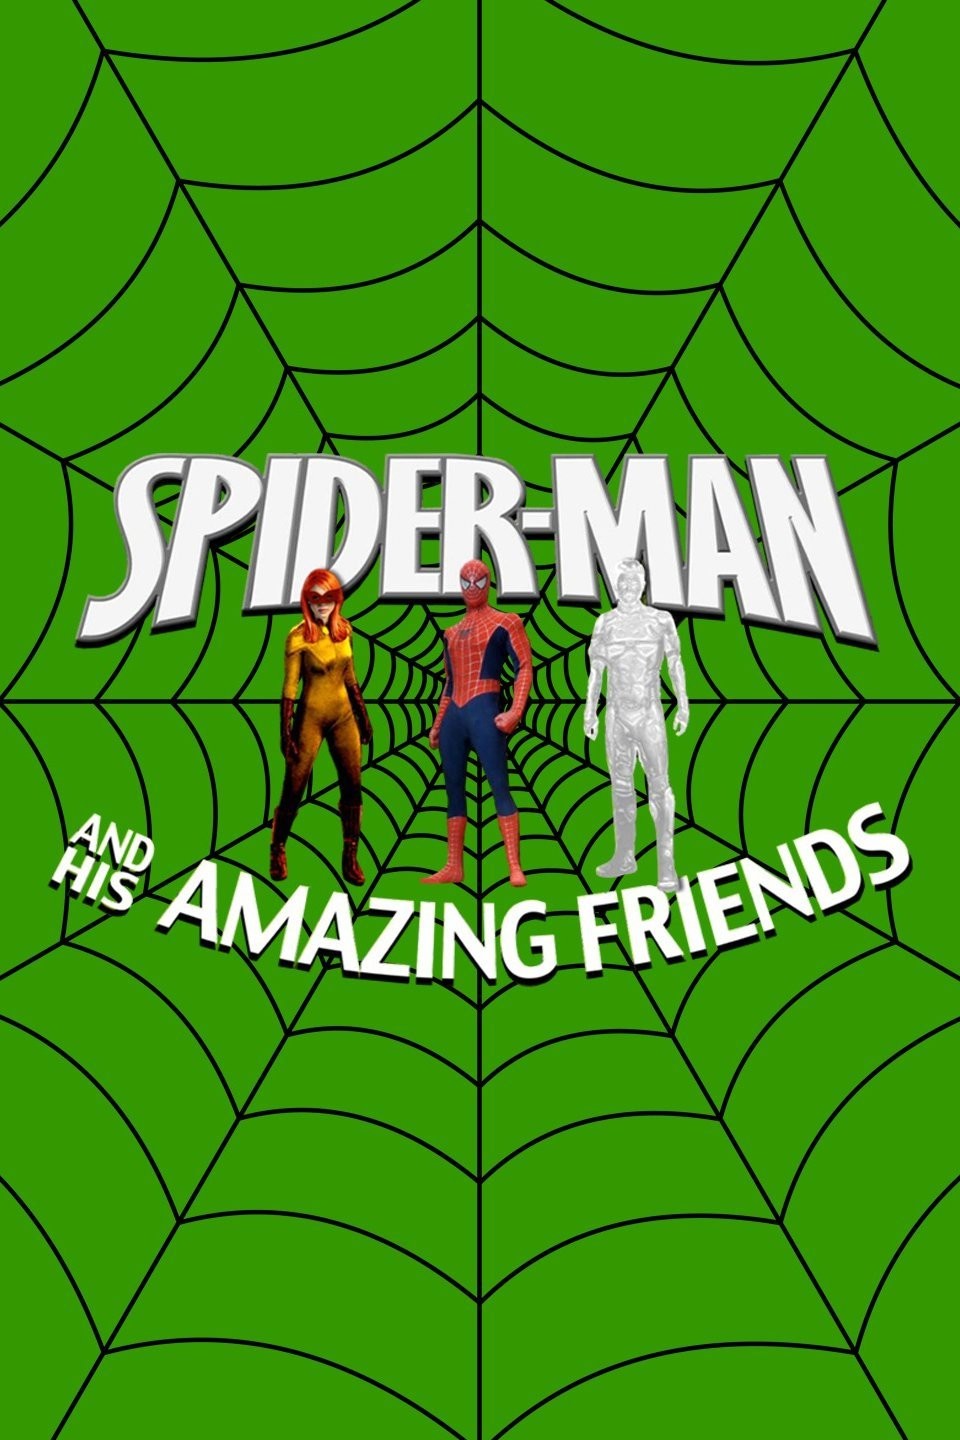 More Spidey and His Amazing Friends confirmed, featuring Fantastic